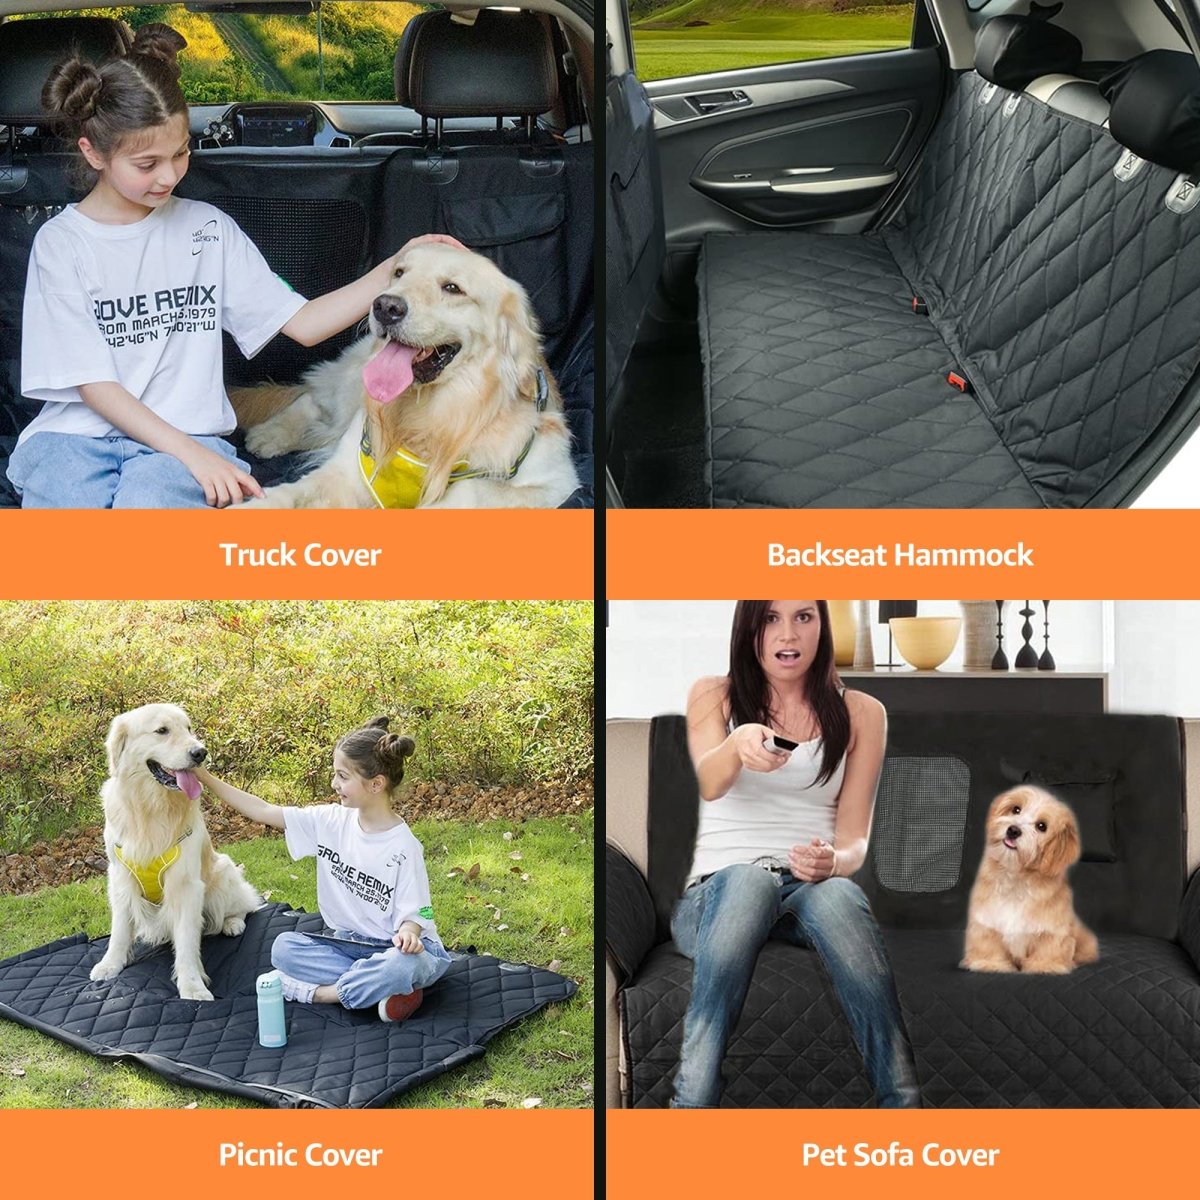 3 Dog Pet Supply Quilted Back Seat Protector - Large